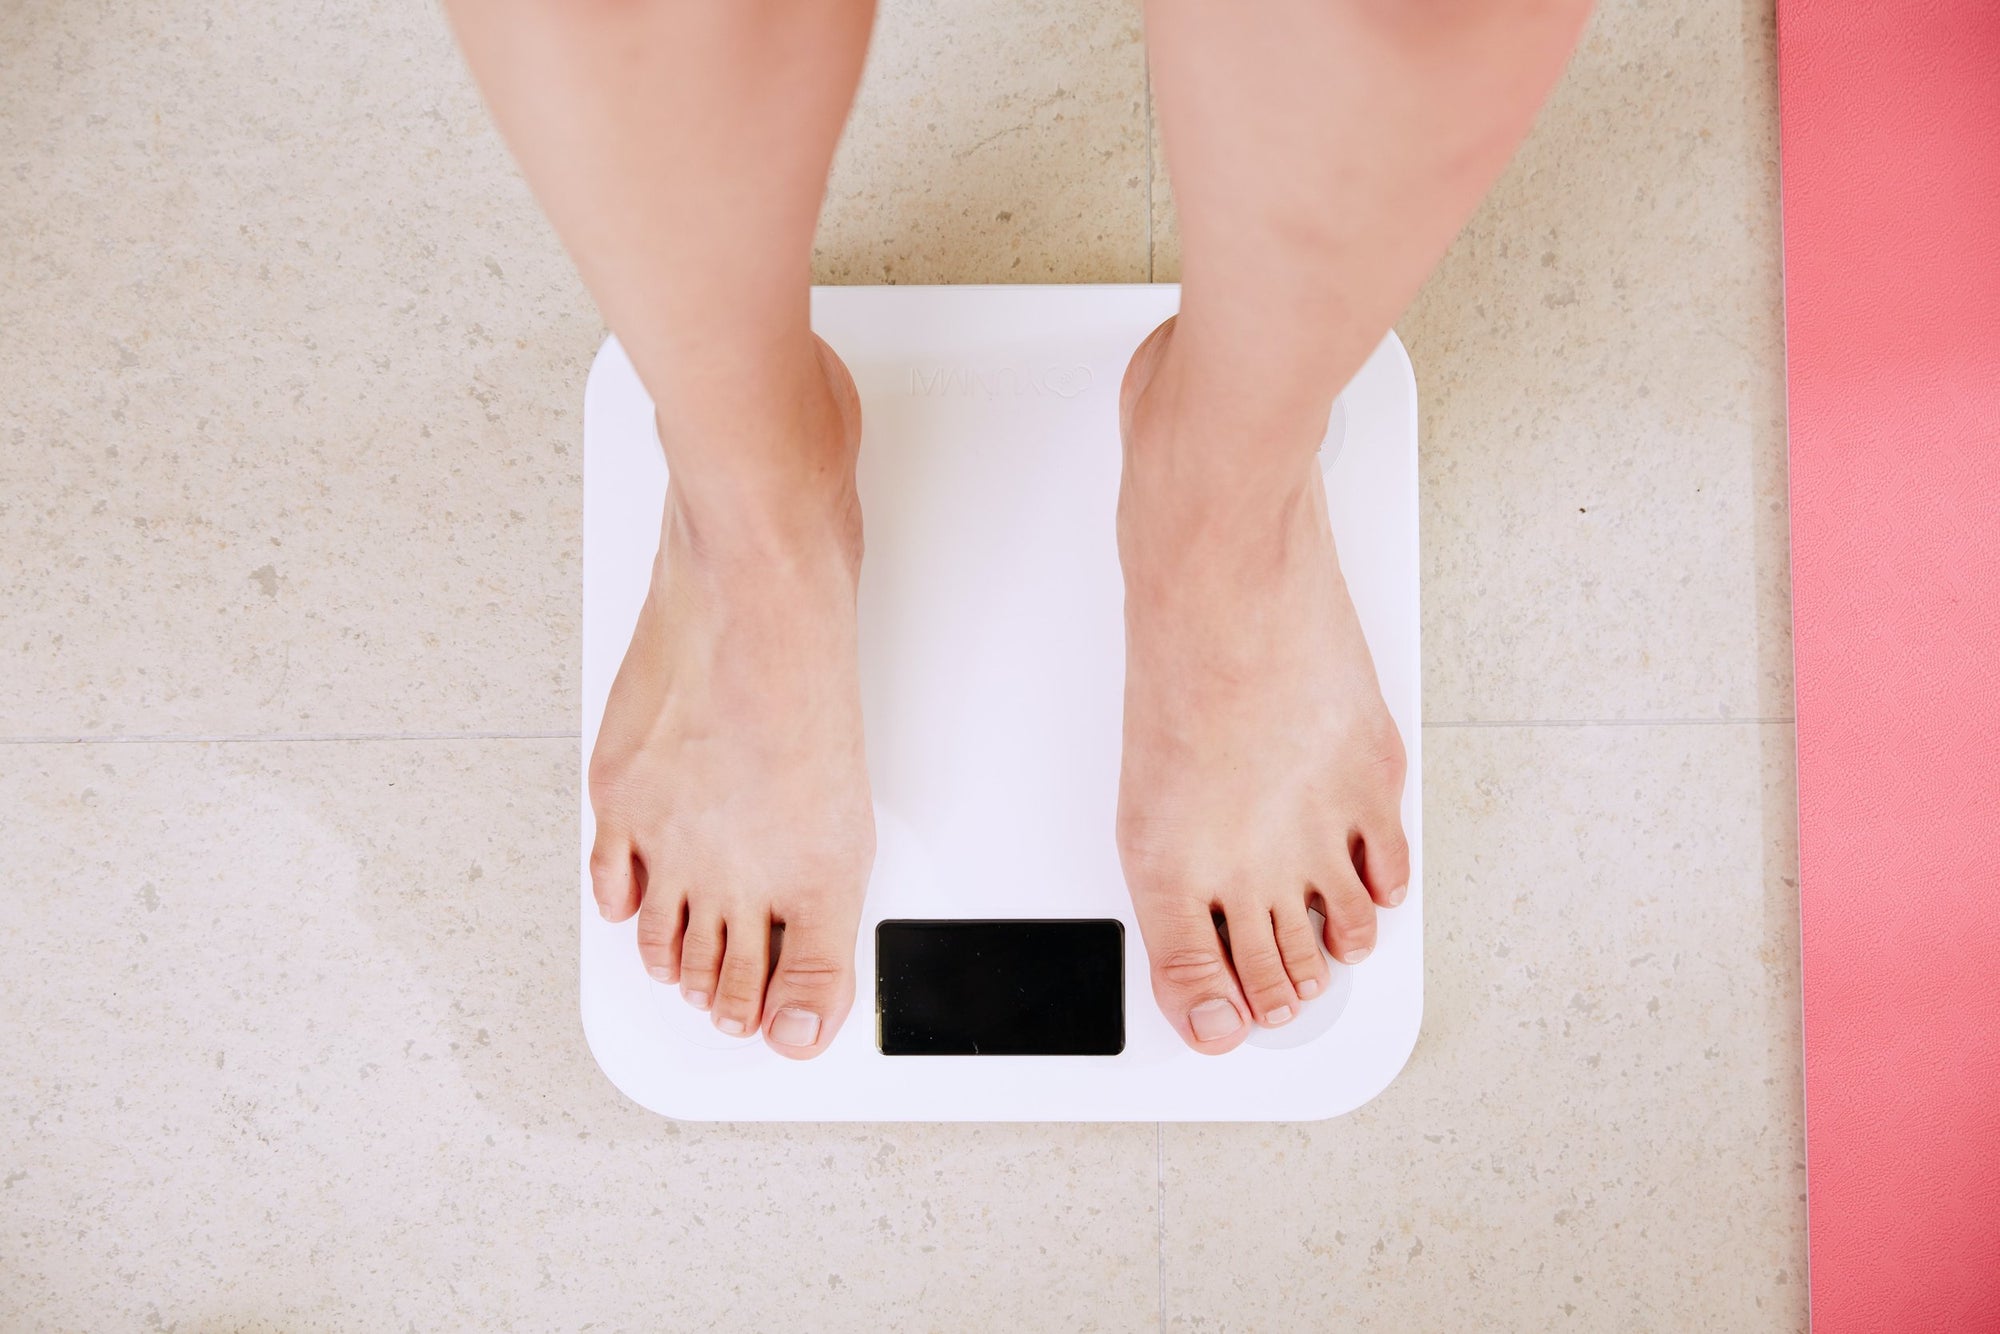 5 causes of weight gain that have nothing to do with calories or exercise